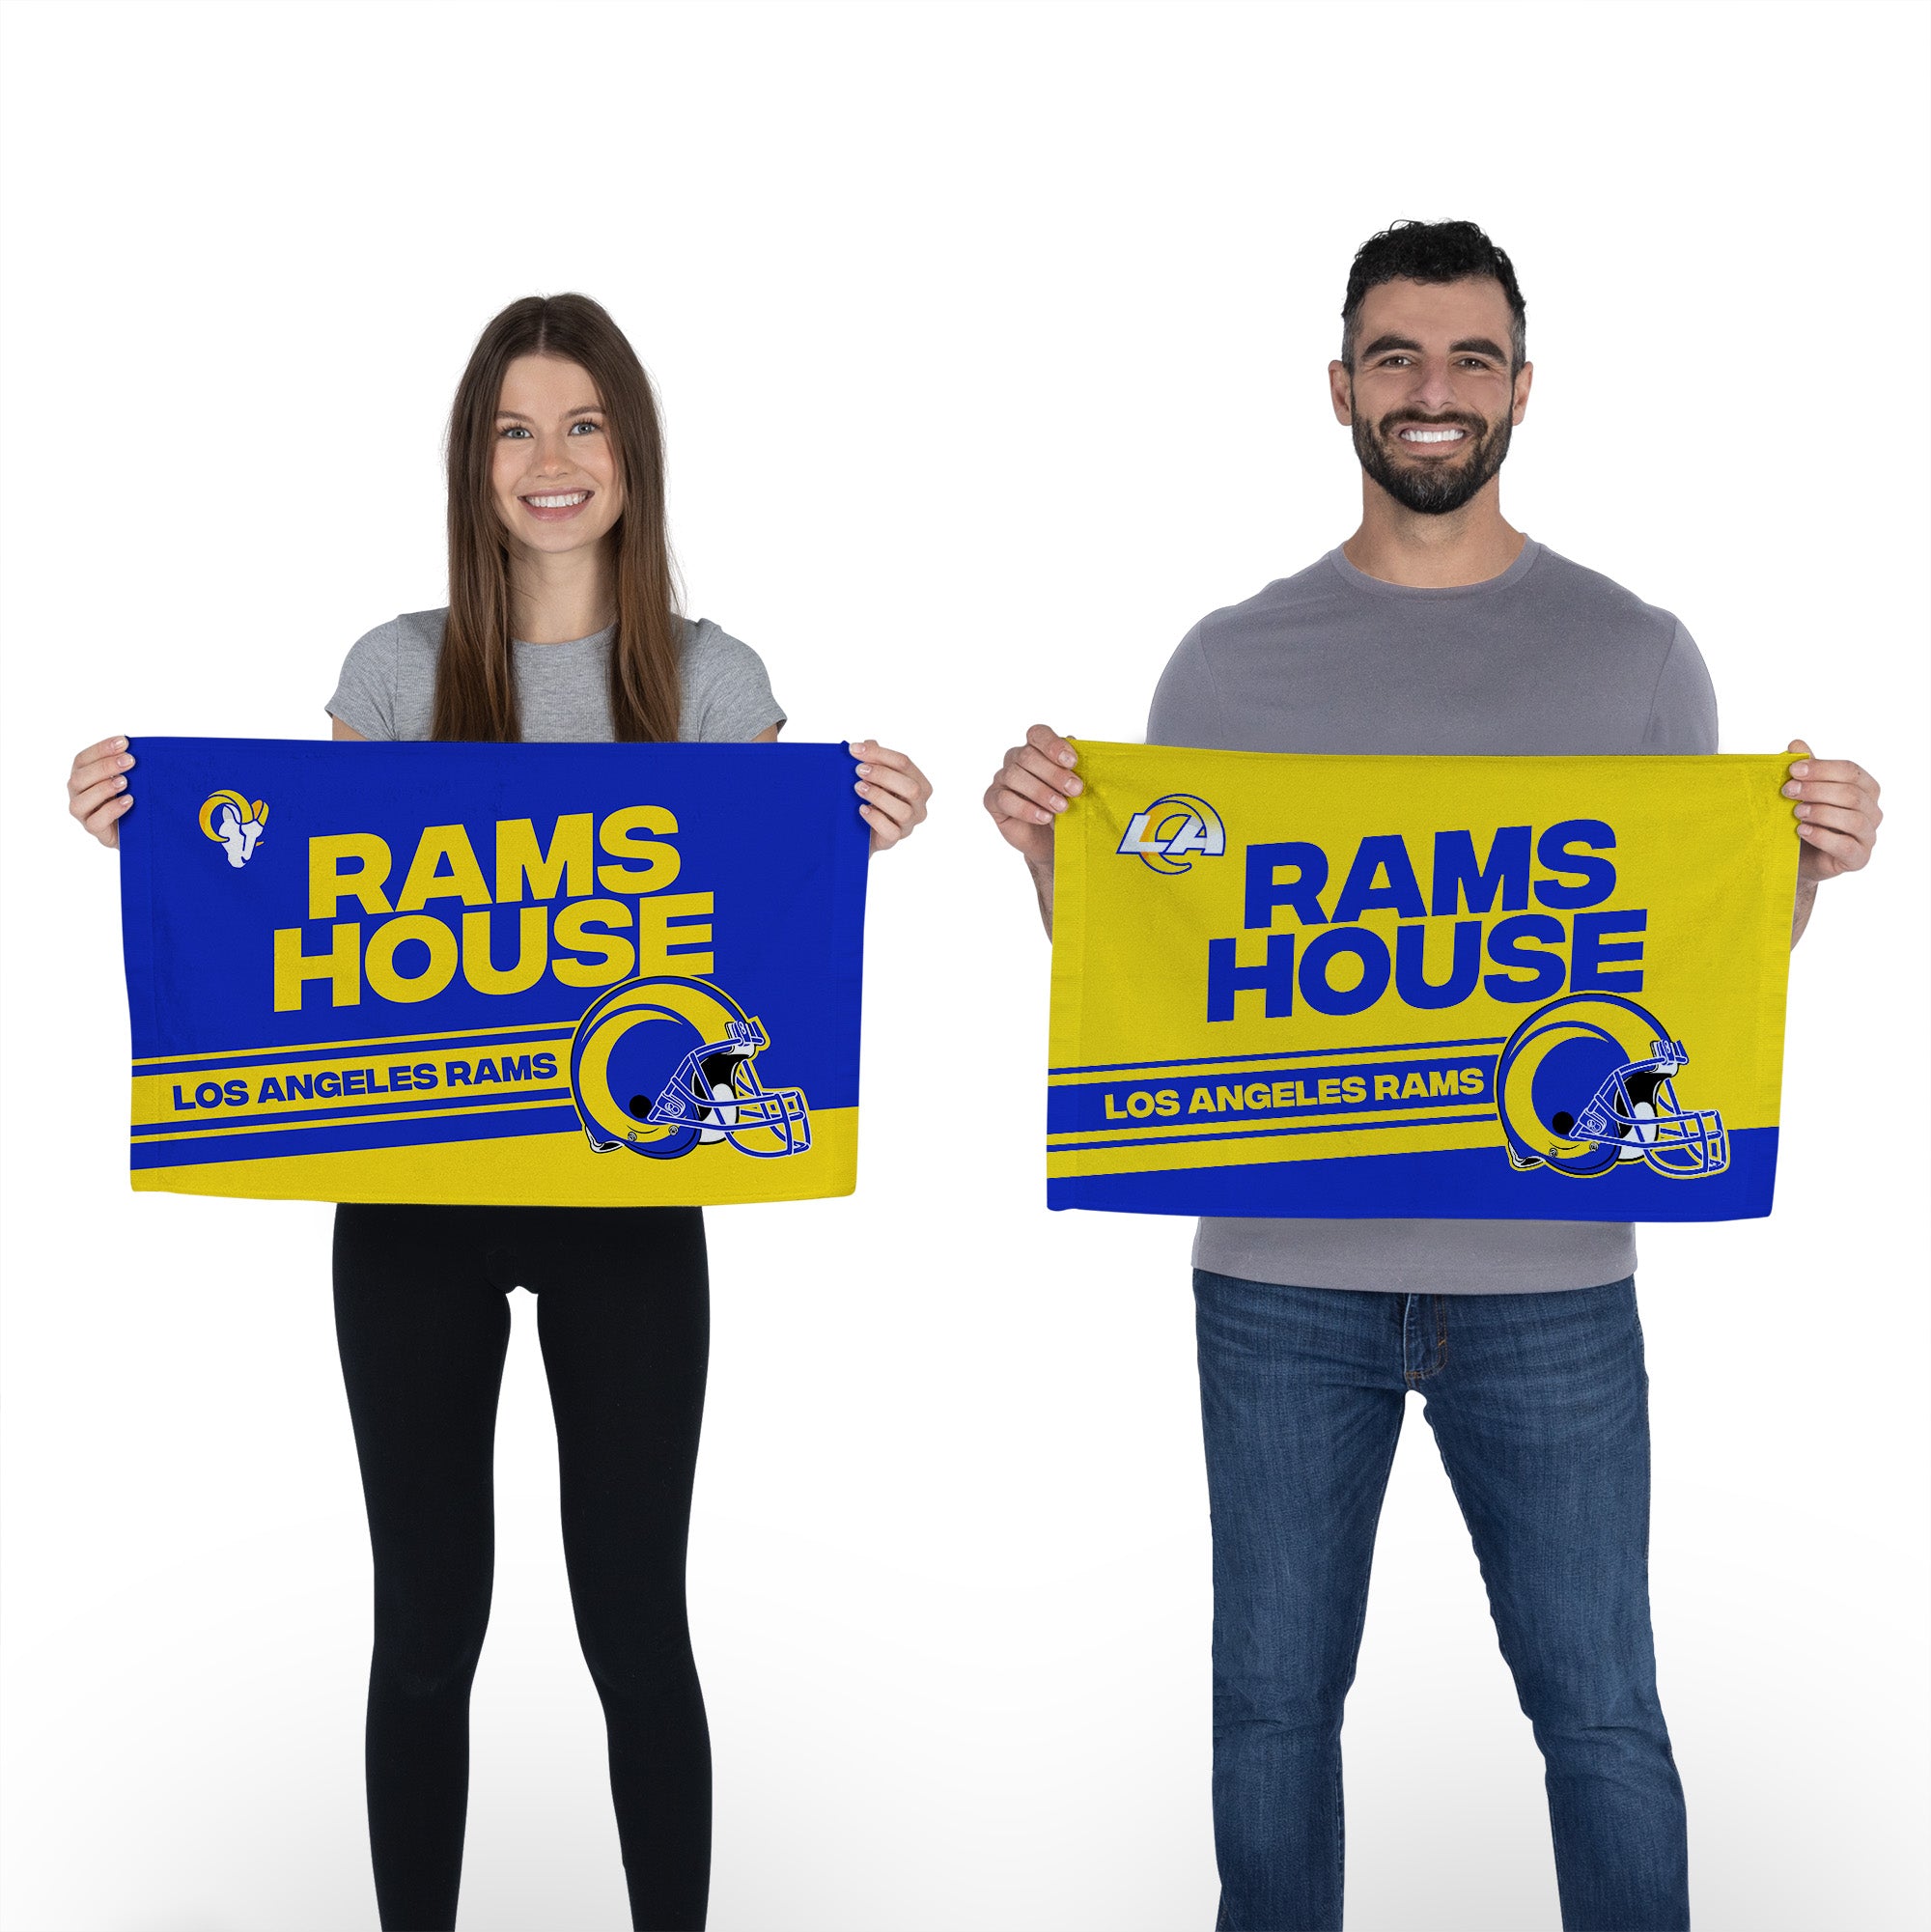 NFL Los Angeles Rams Play Action Fan Towel 2 Pack 16 x 25 Inches